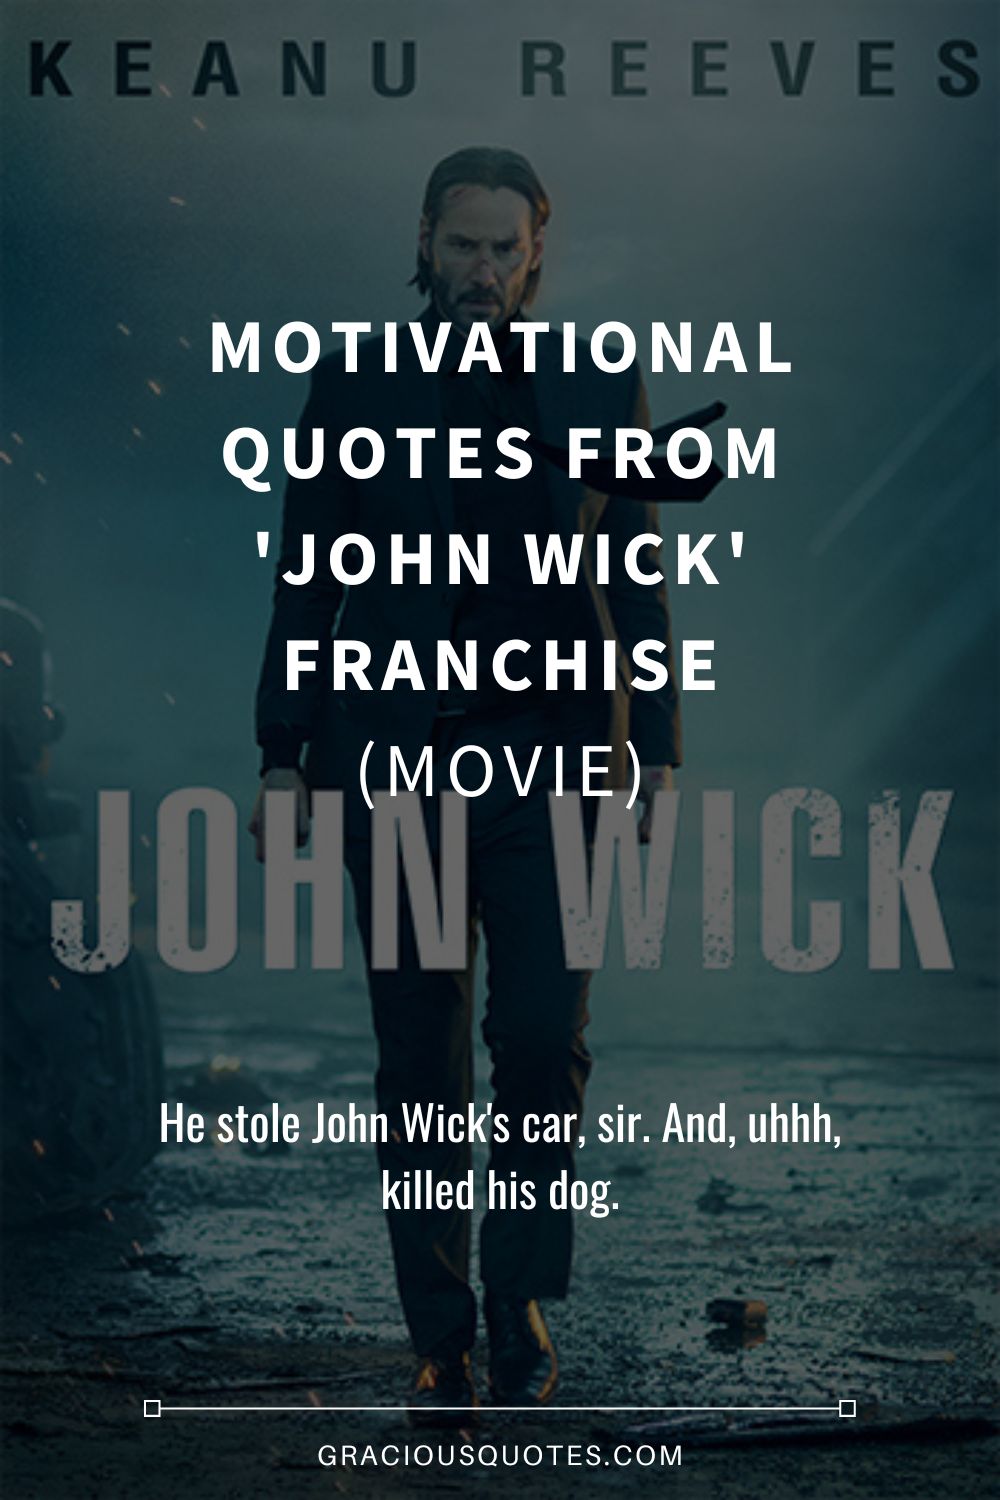 Motivational Quotes from 'John Wick' Franchise (MOVIE) - Gracious Quotes